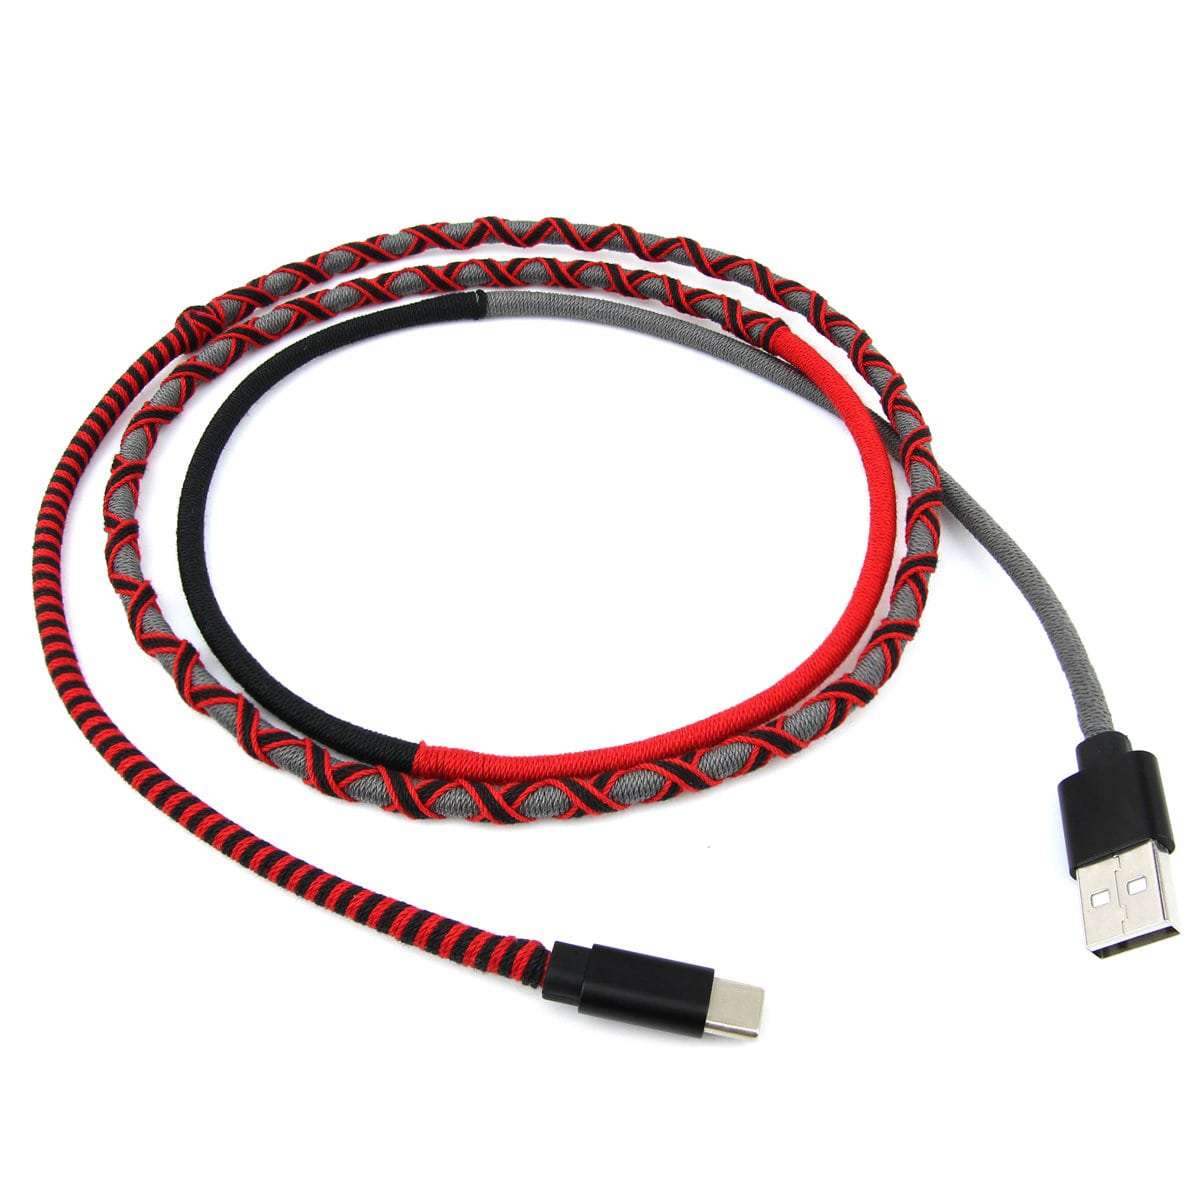 Type C Fast Charging Cable - Red & Black